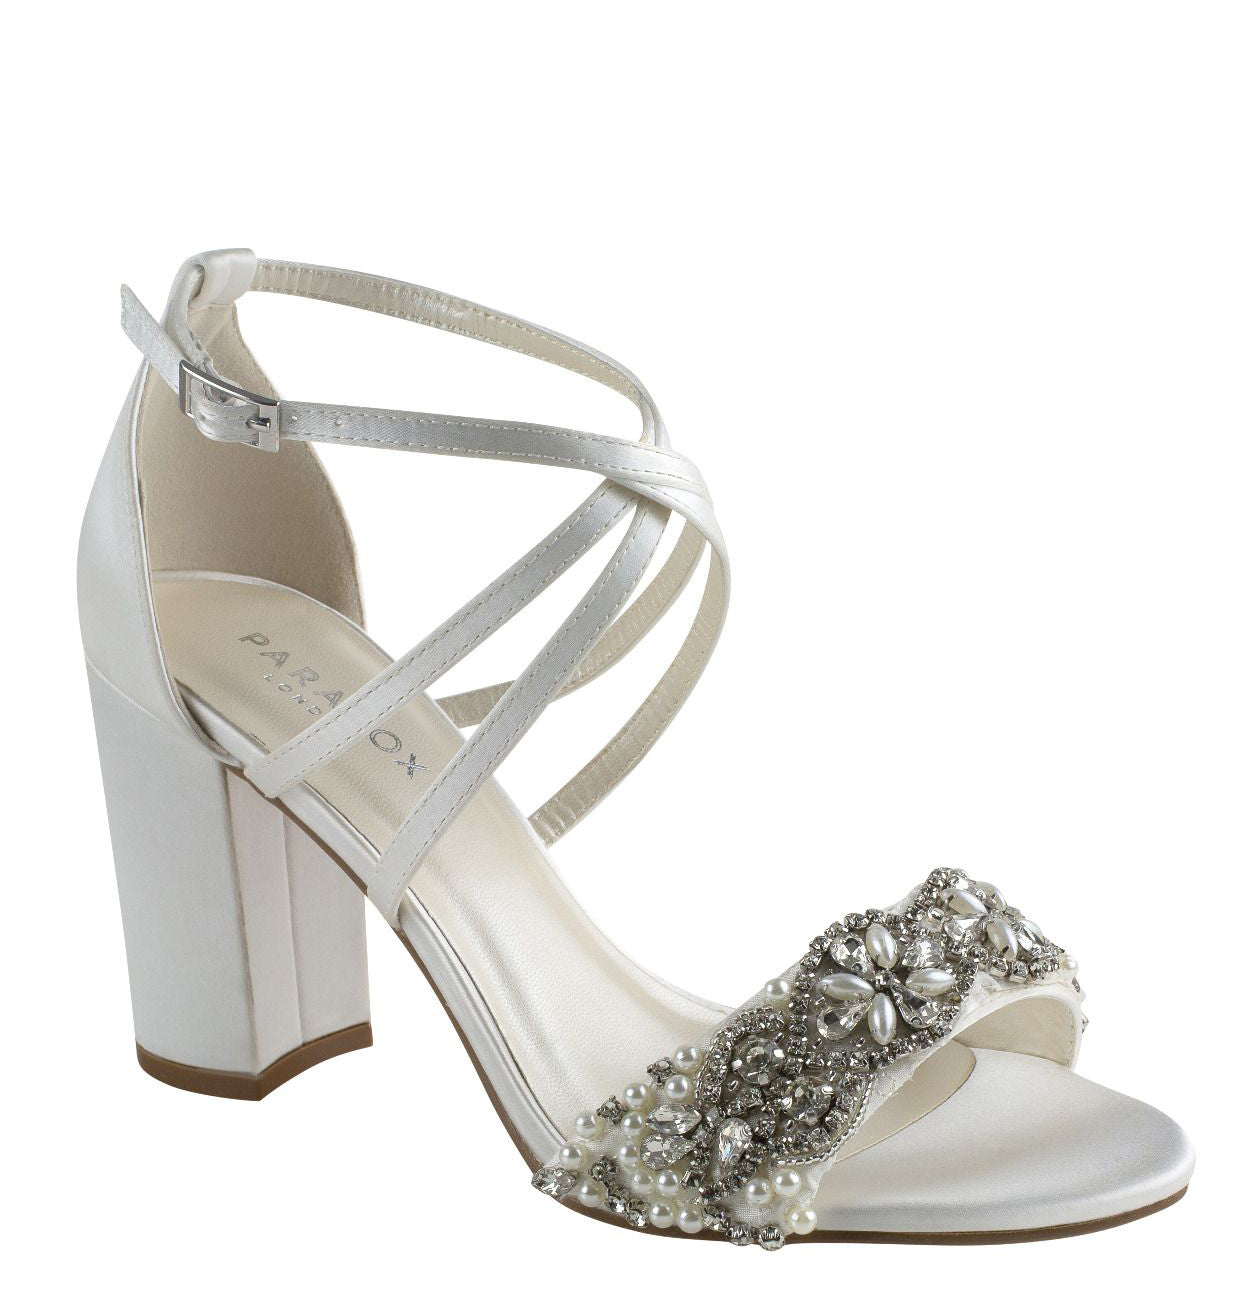 Ivory Sandal with 2.75 inch block heel and decrotive strap